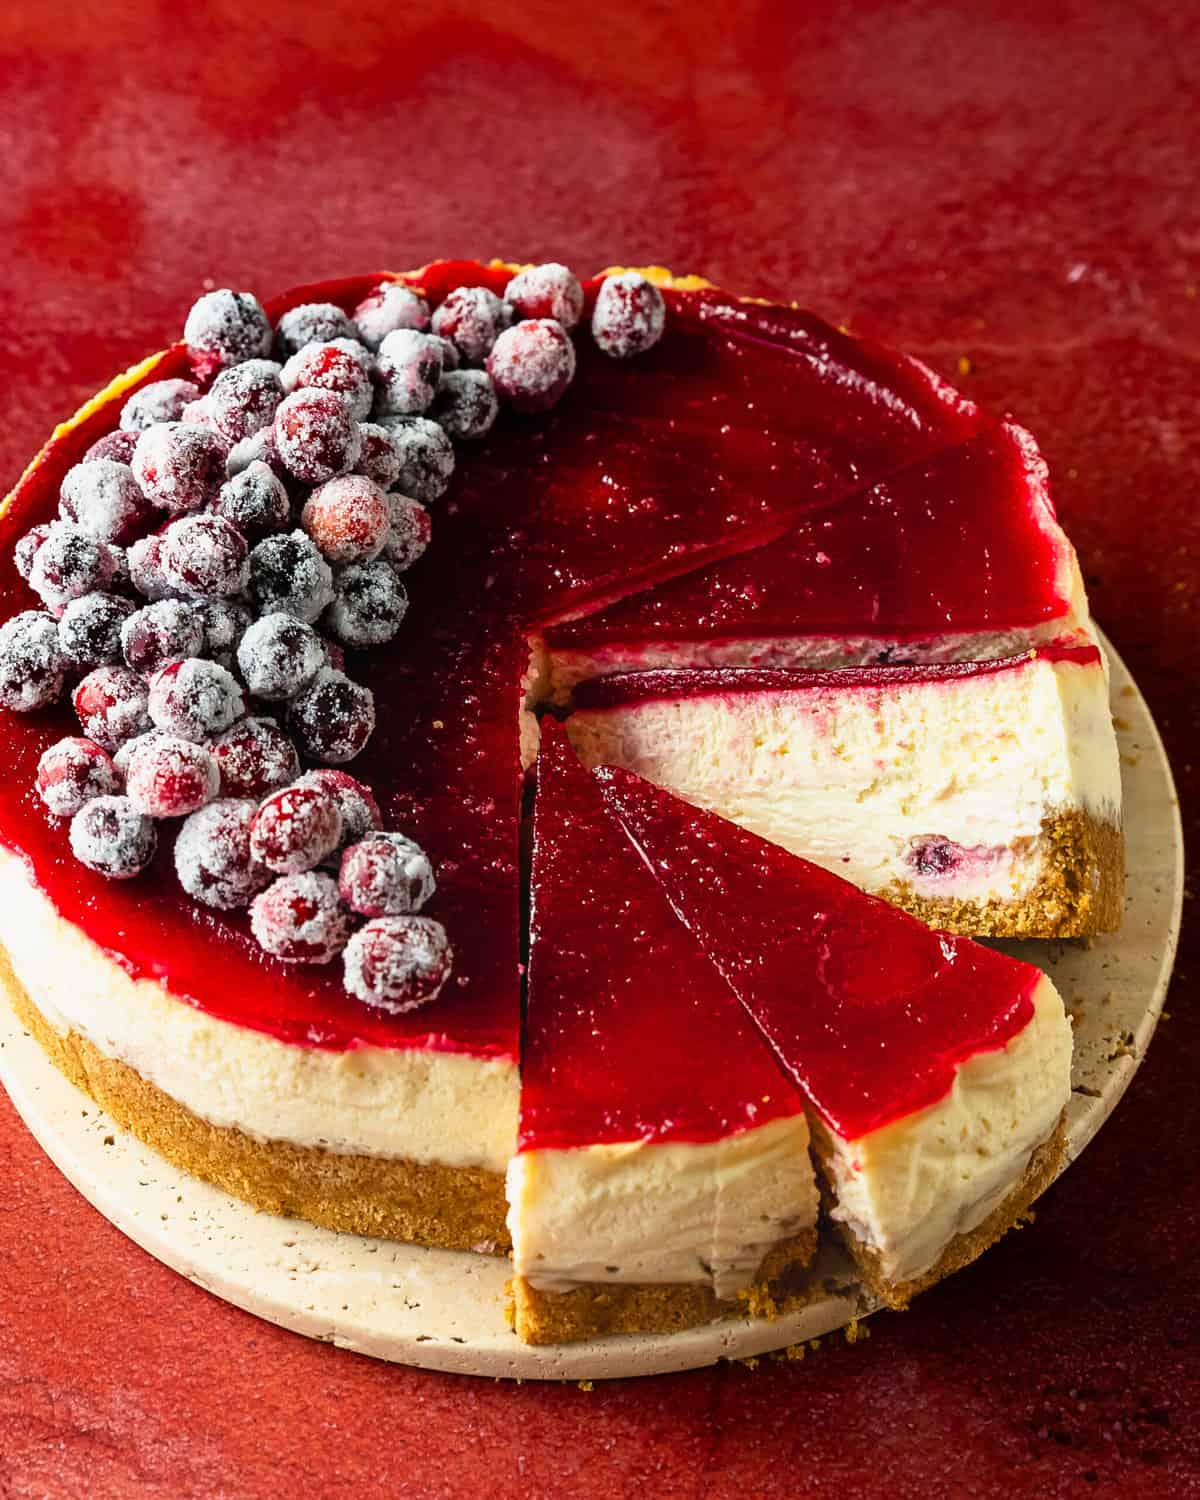 Cranberry cheesecake is a rich and creamy cranberry swirled cheesecake with a classic orange infused graham cracker crust. This decadent cheesecake with cranberries is topped with a beautiful ruby hued cranberry glaze and candied cranberries.  Make this cranberry topped cheesecake the next time you need a simple, stunning and celebratory dessert. 